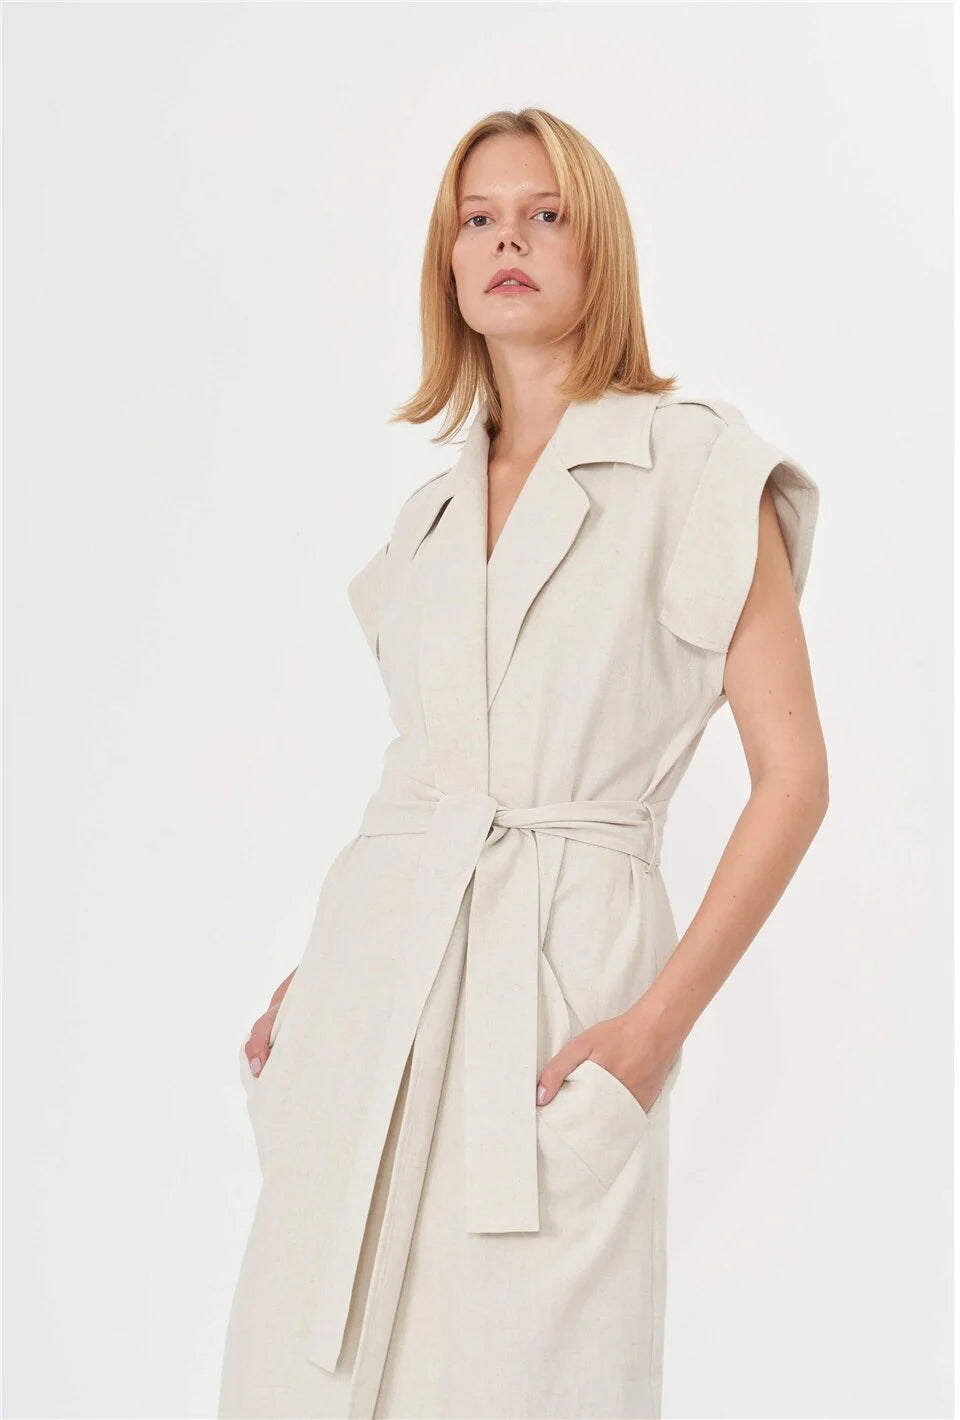 Stylish Trench Coat - White, a versatile addition to your wardrobe.